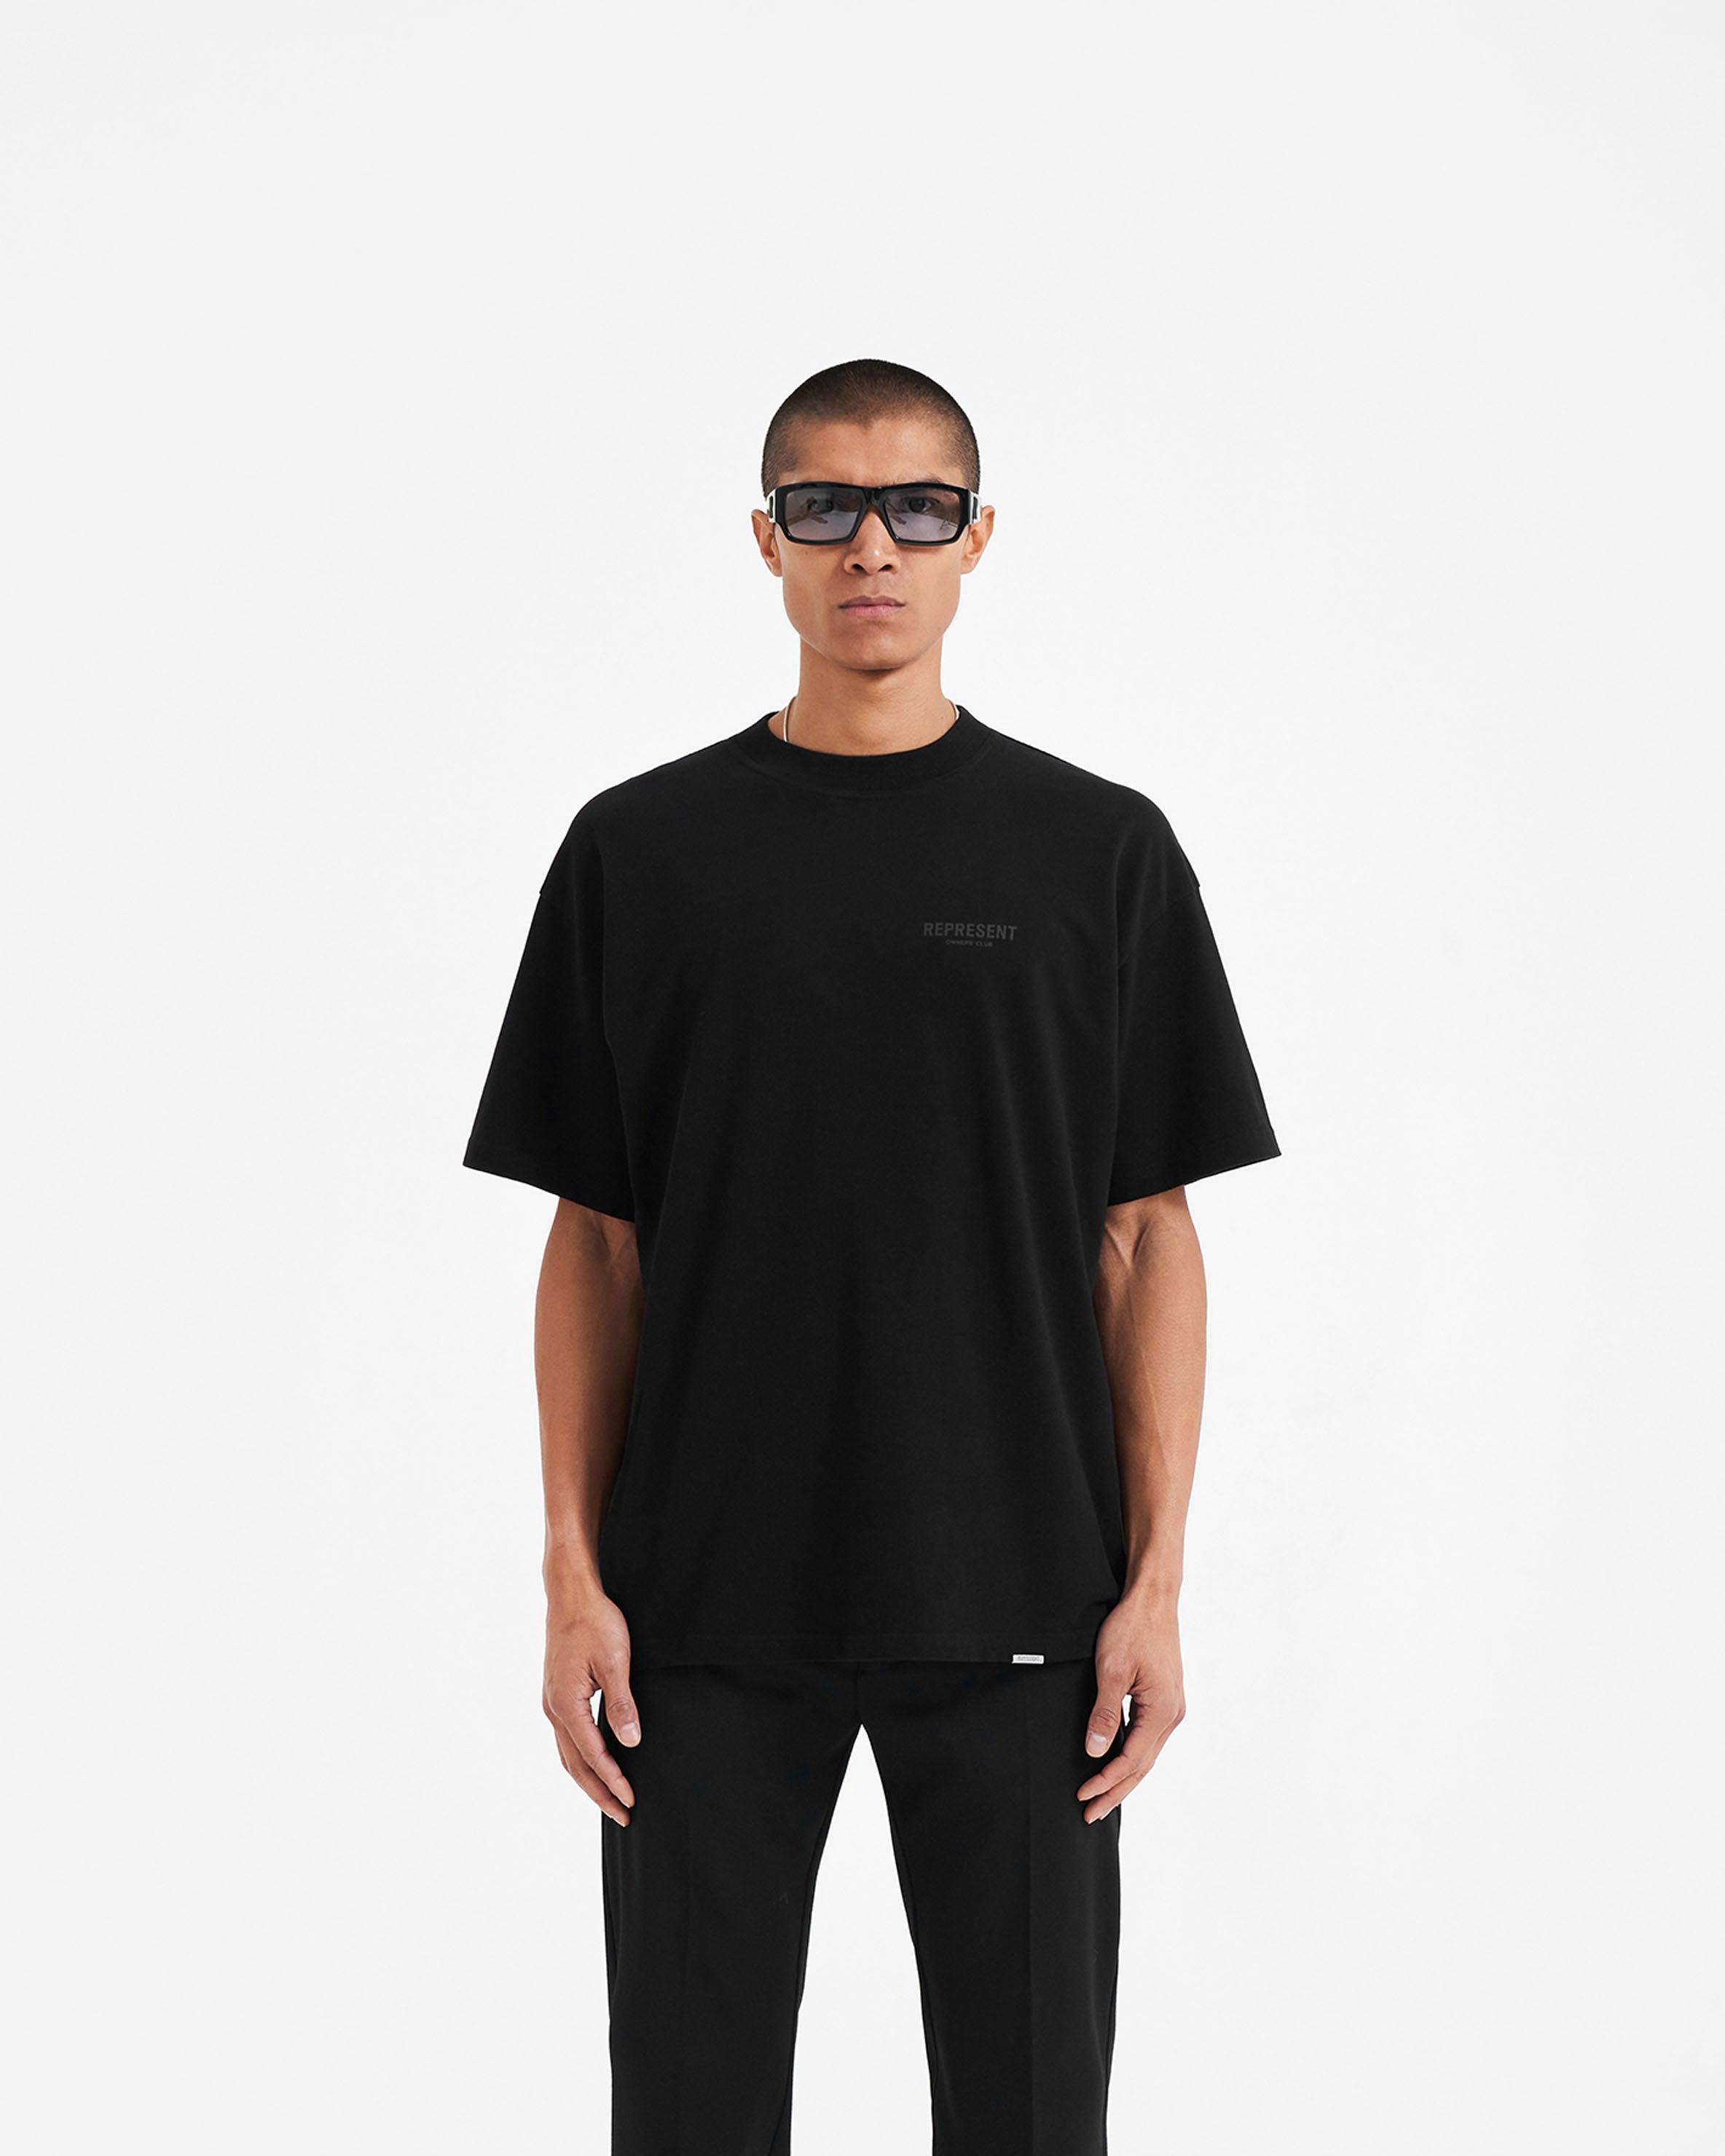 Represent Owners Club T-Shirt - Black Reflective